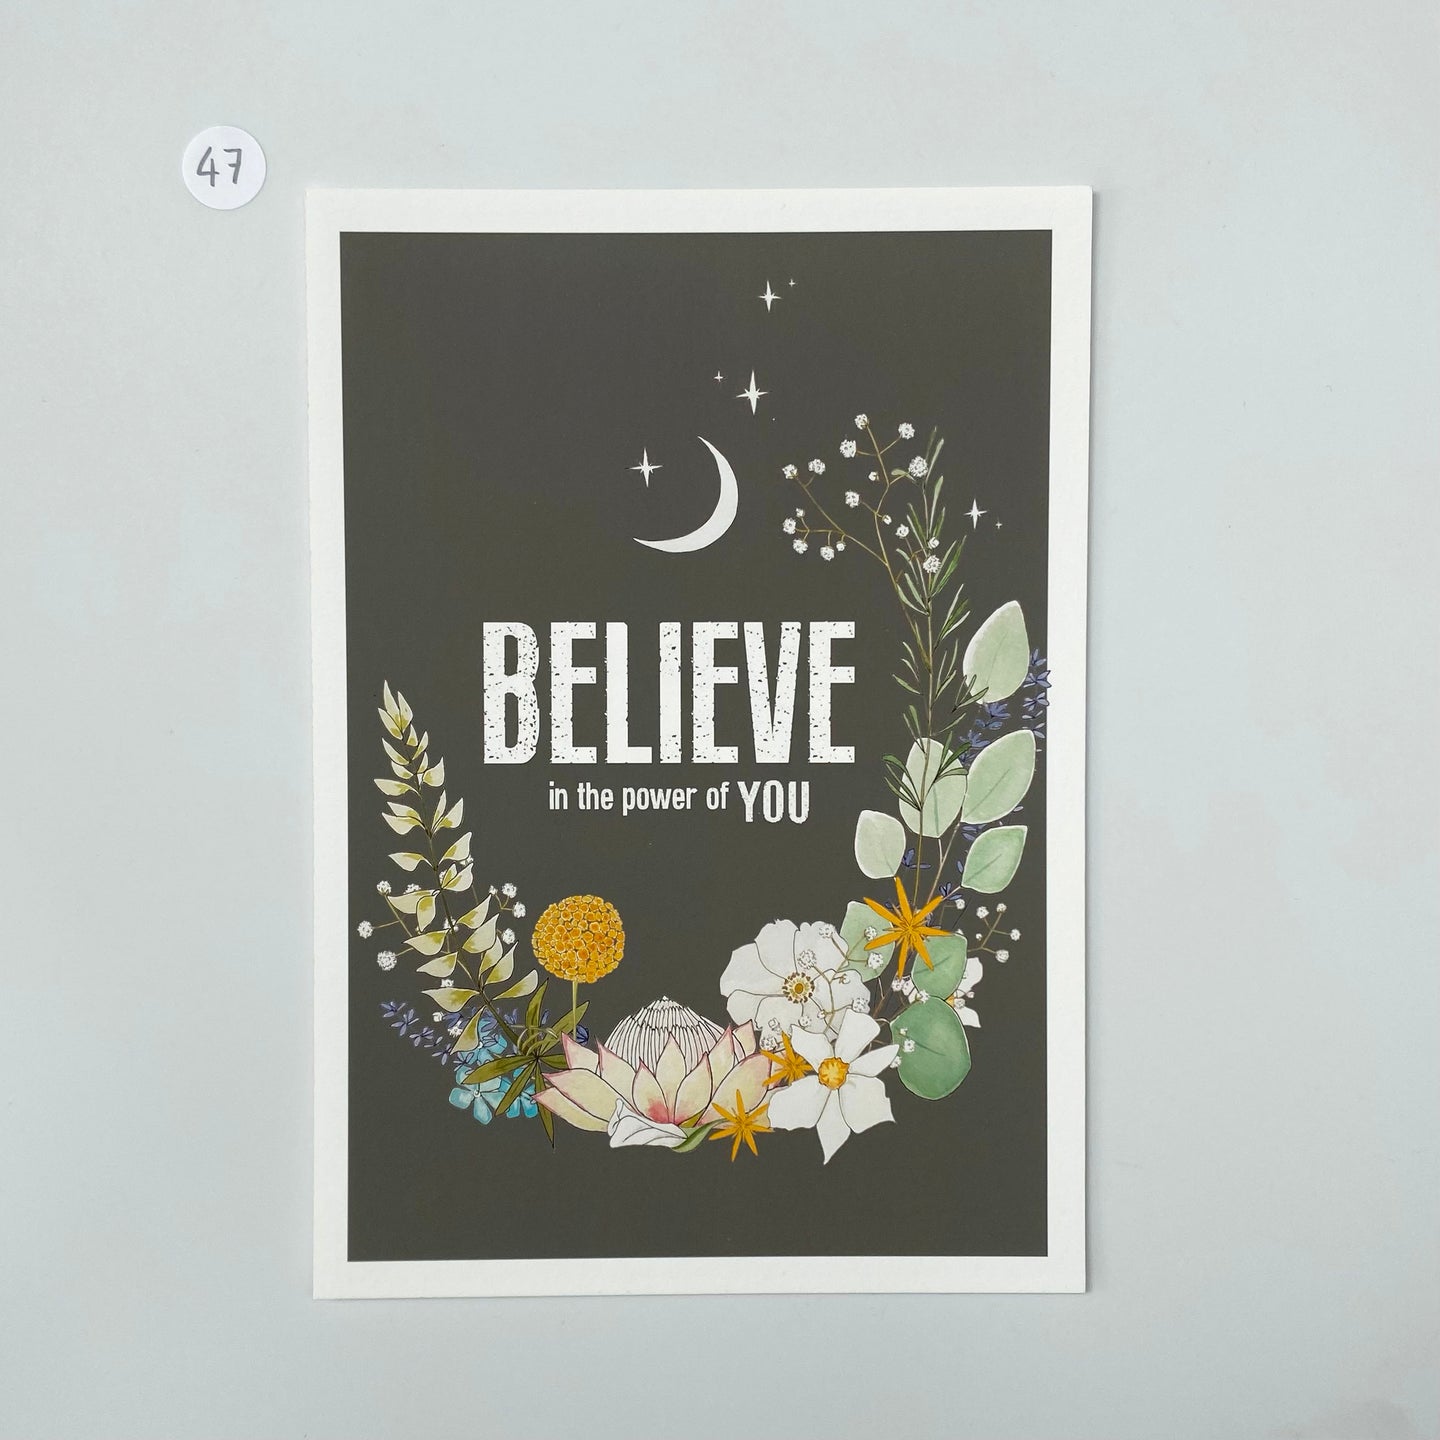 Outlet 47: Believe in the power of You - A5